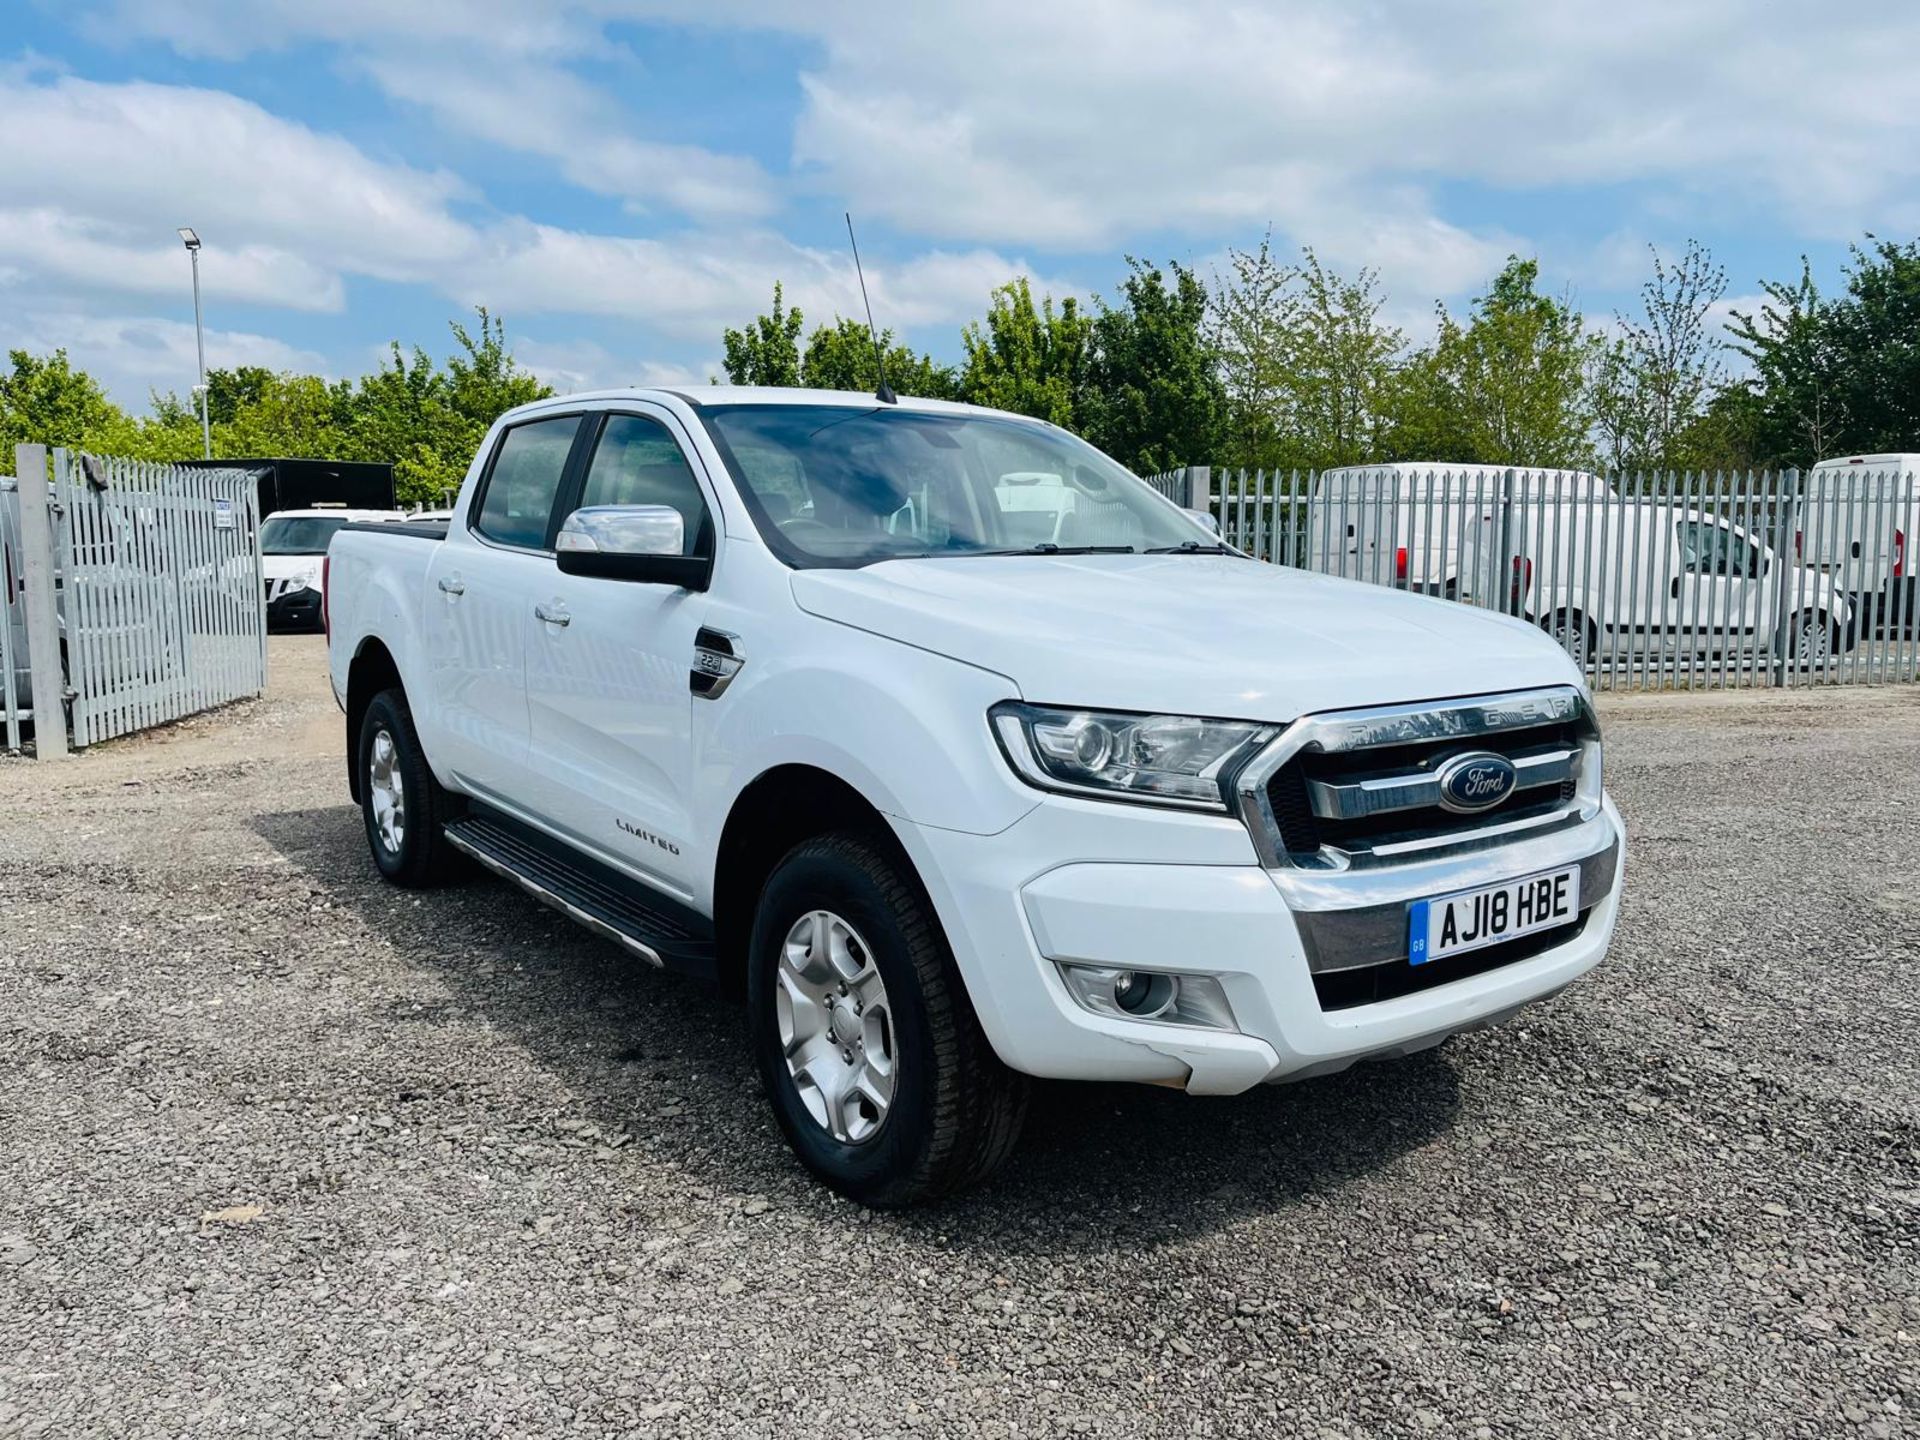 ** ON SALE ** Ford Ranger Limited 2.2 TDCI 4WD 2018 '18 Reg' -Automatic- ULEZ Compliant -A/C